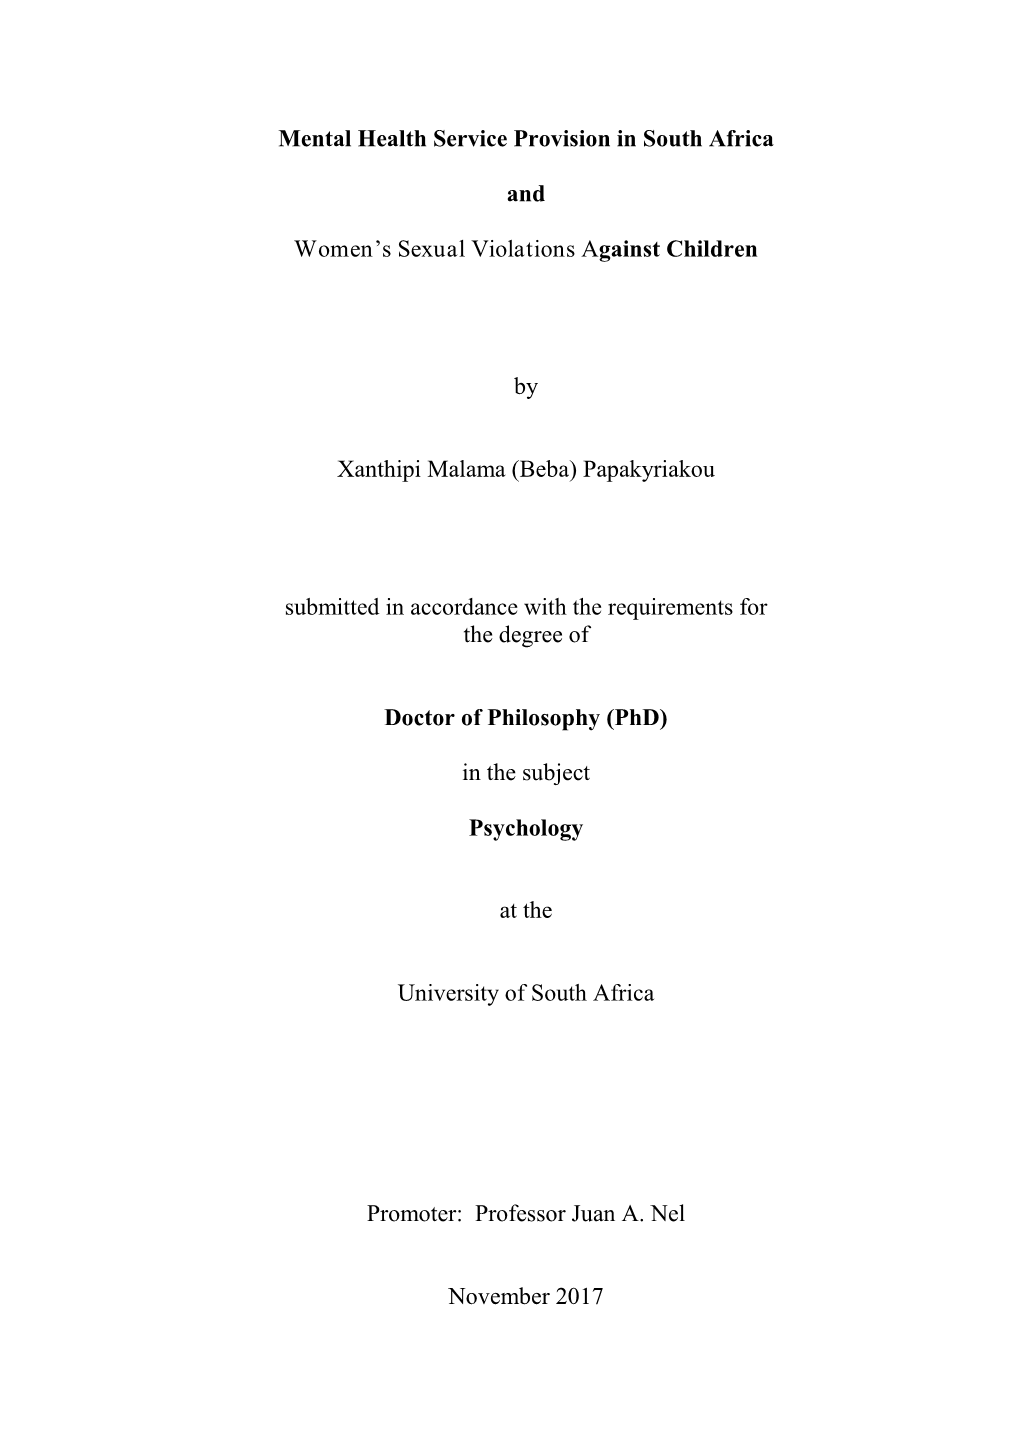 Mental Health Service Provision in South Africa and Women's Sexual Violations Against Children by Xanthipi Malama